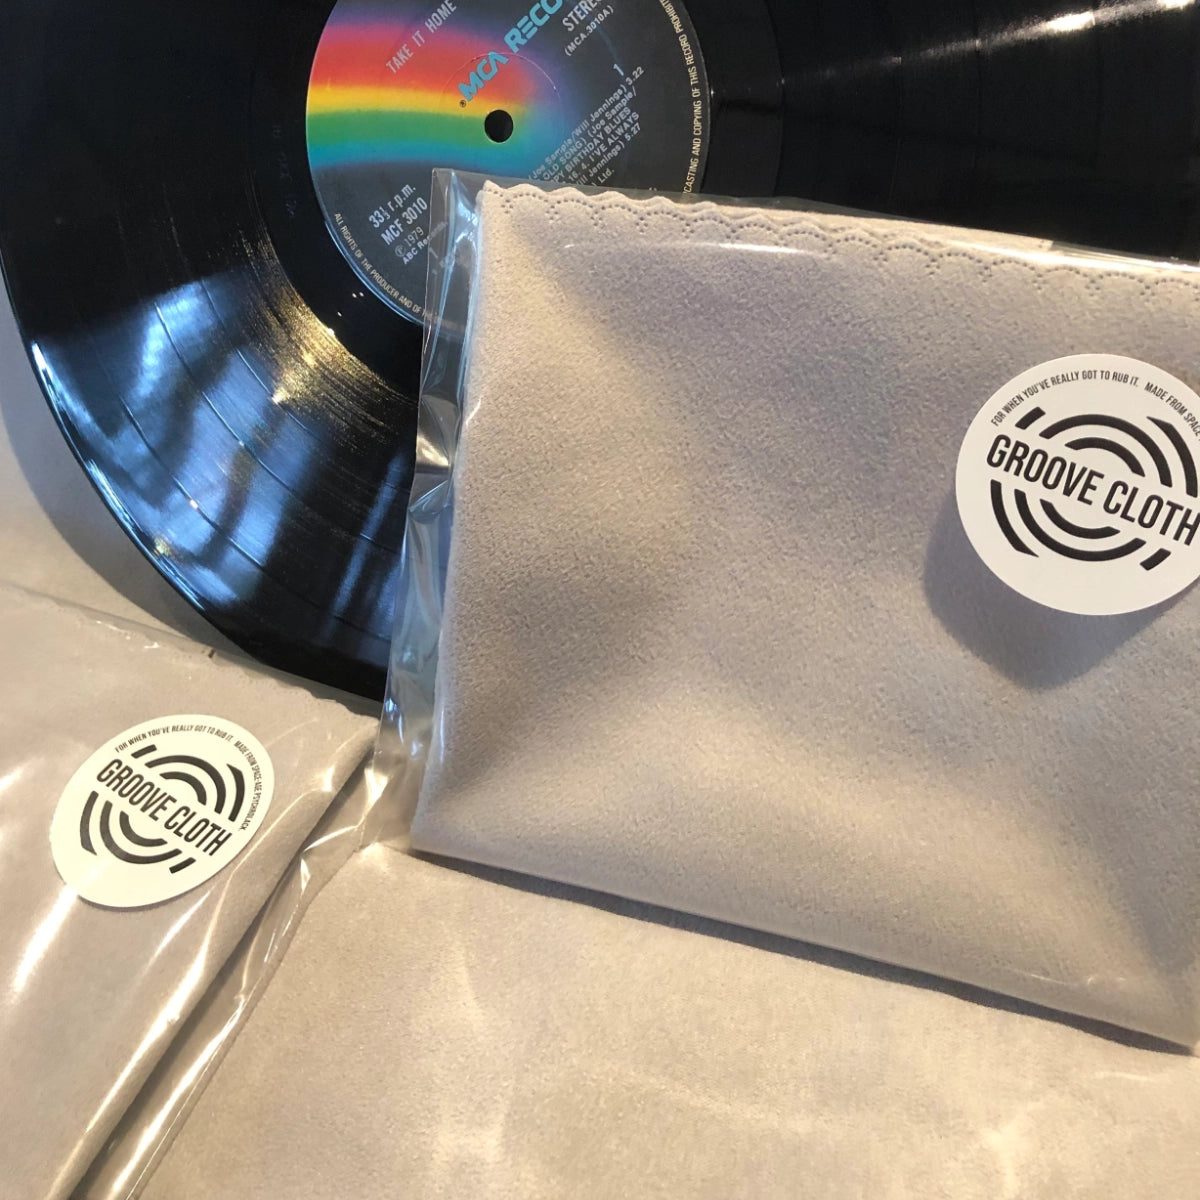 Groove Cloth Vinyl Record Cleaner